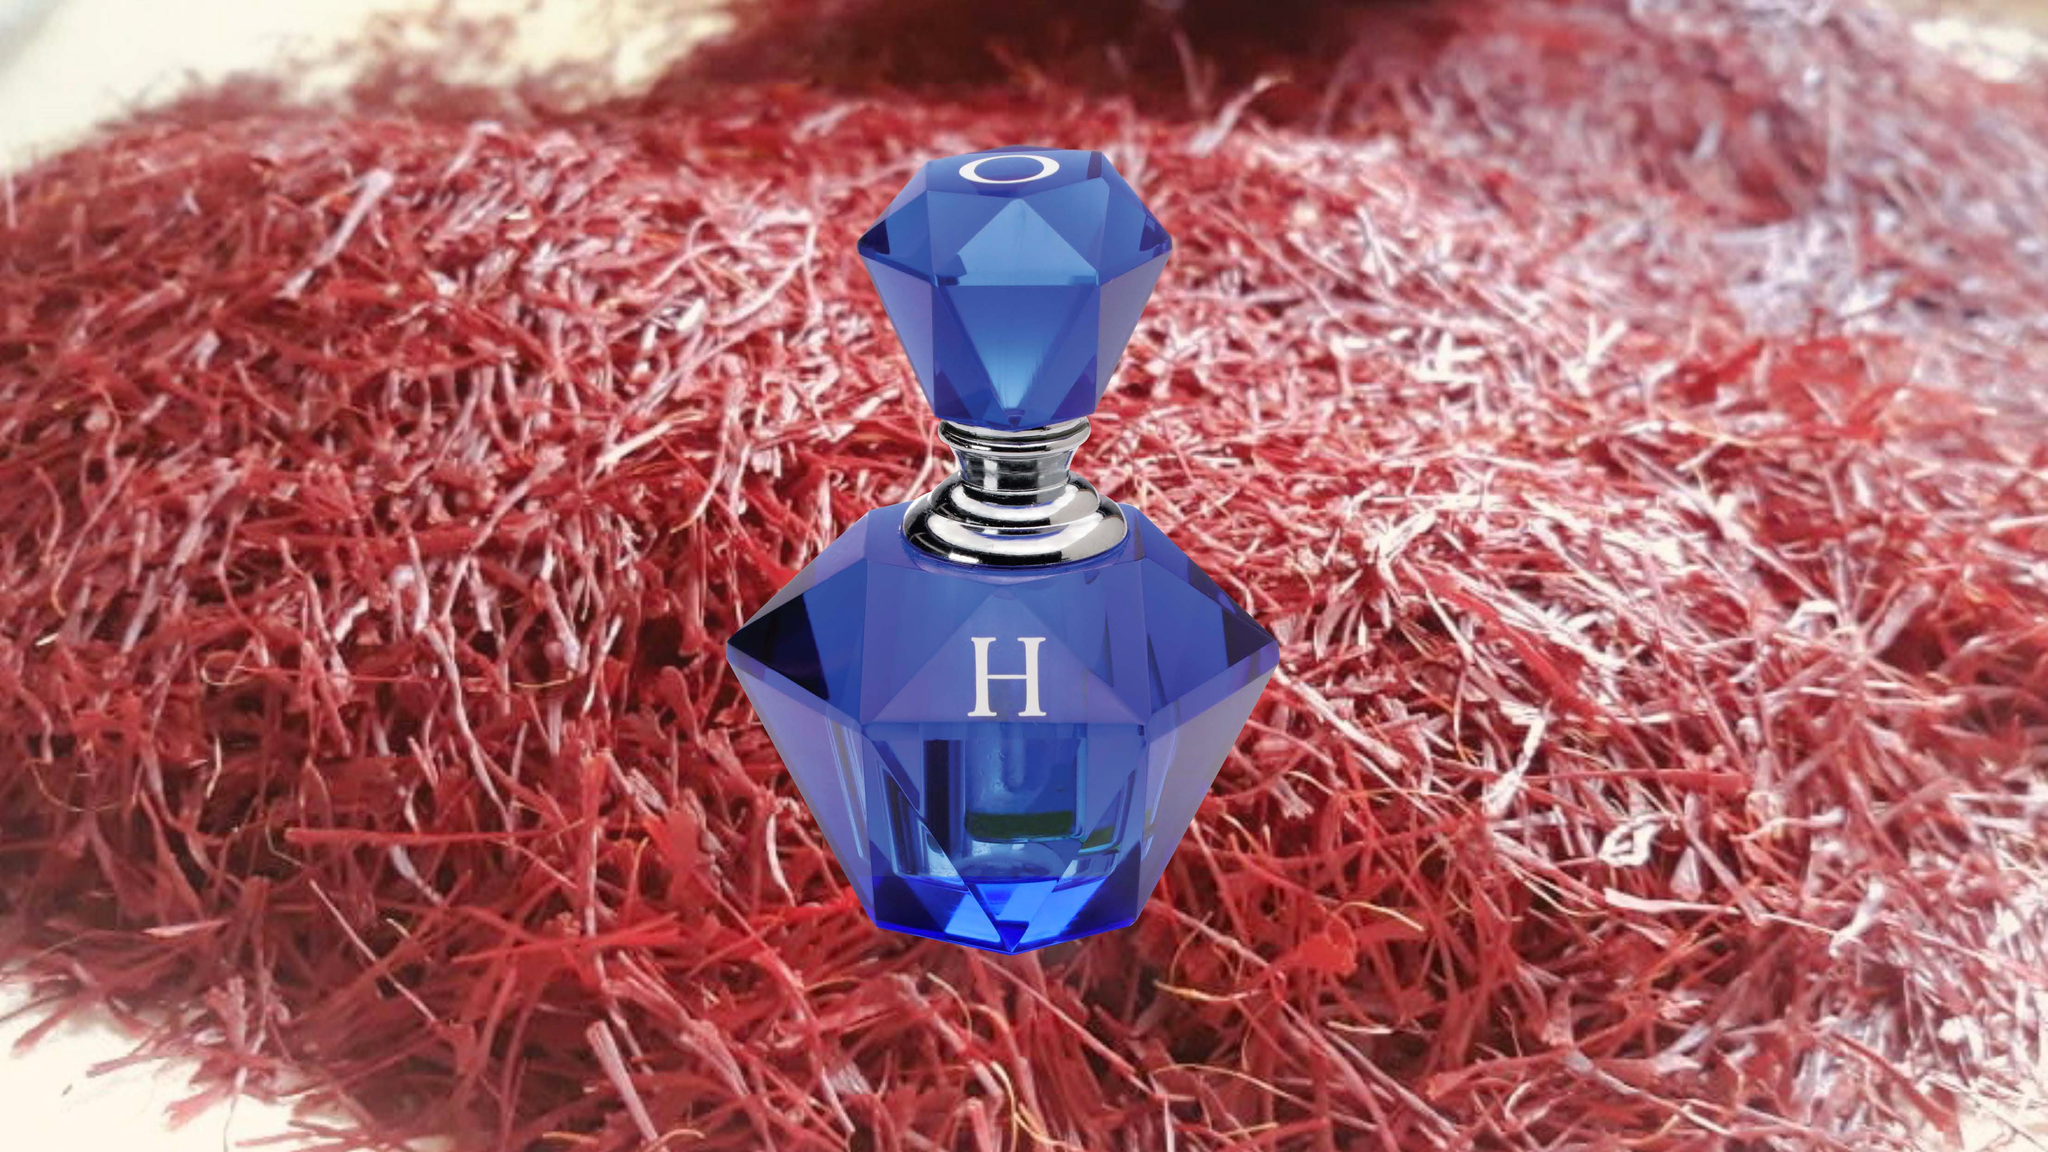 A blue perfume bottle and jasmin flowers in the background